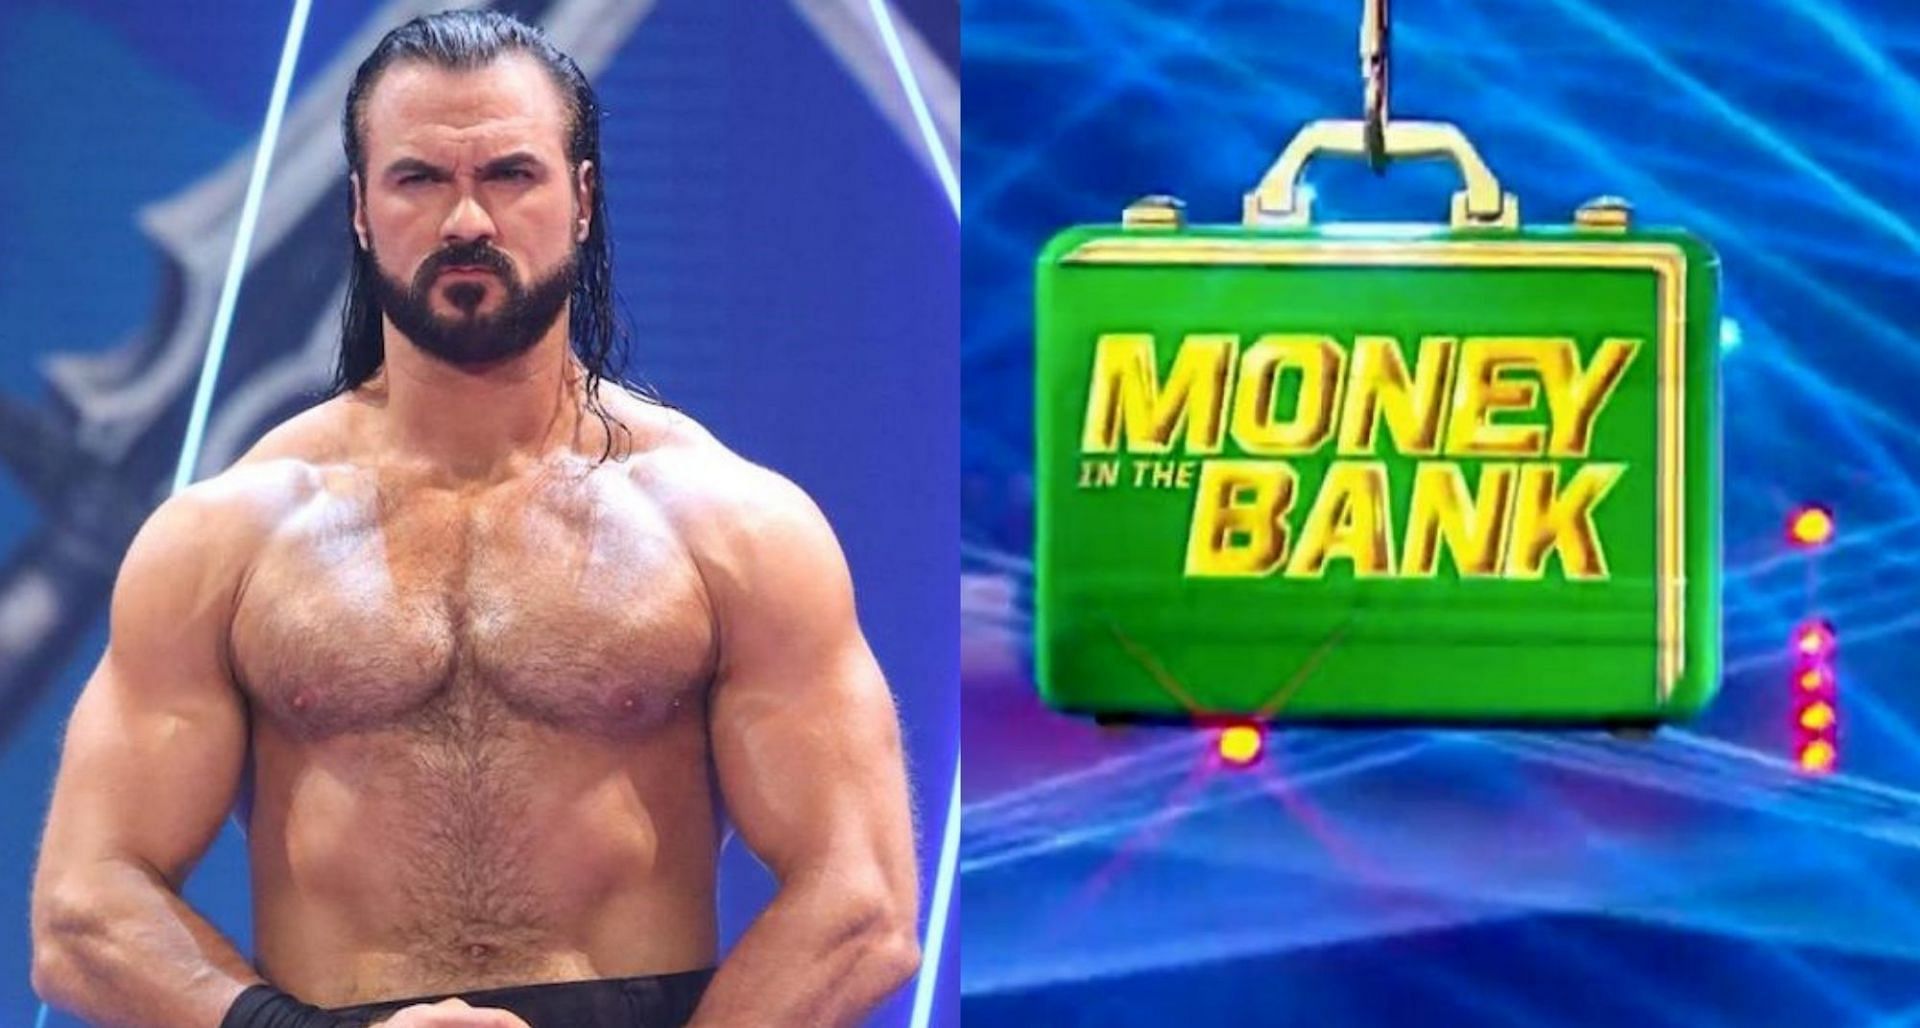 Will Drew McIntyre become Mr. Money in the Bank?